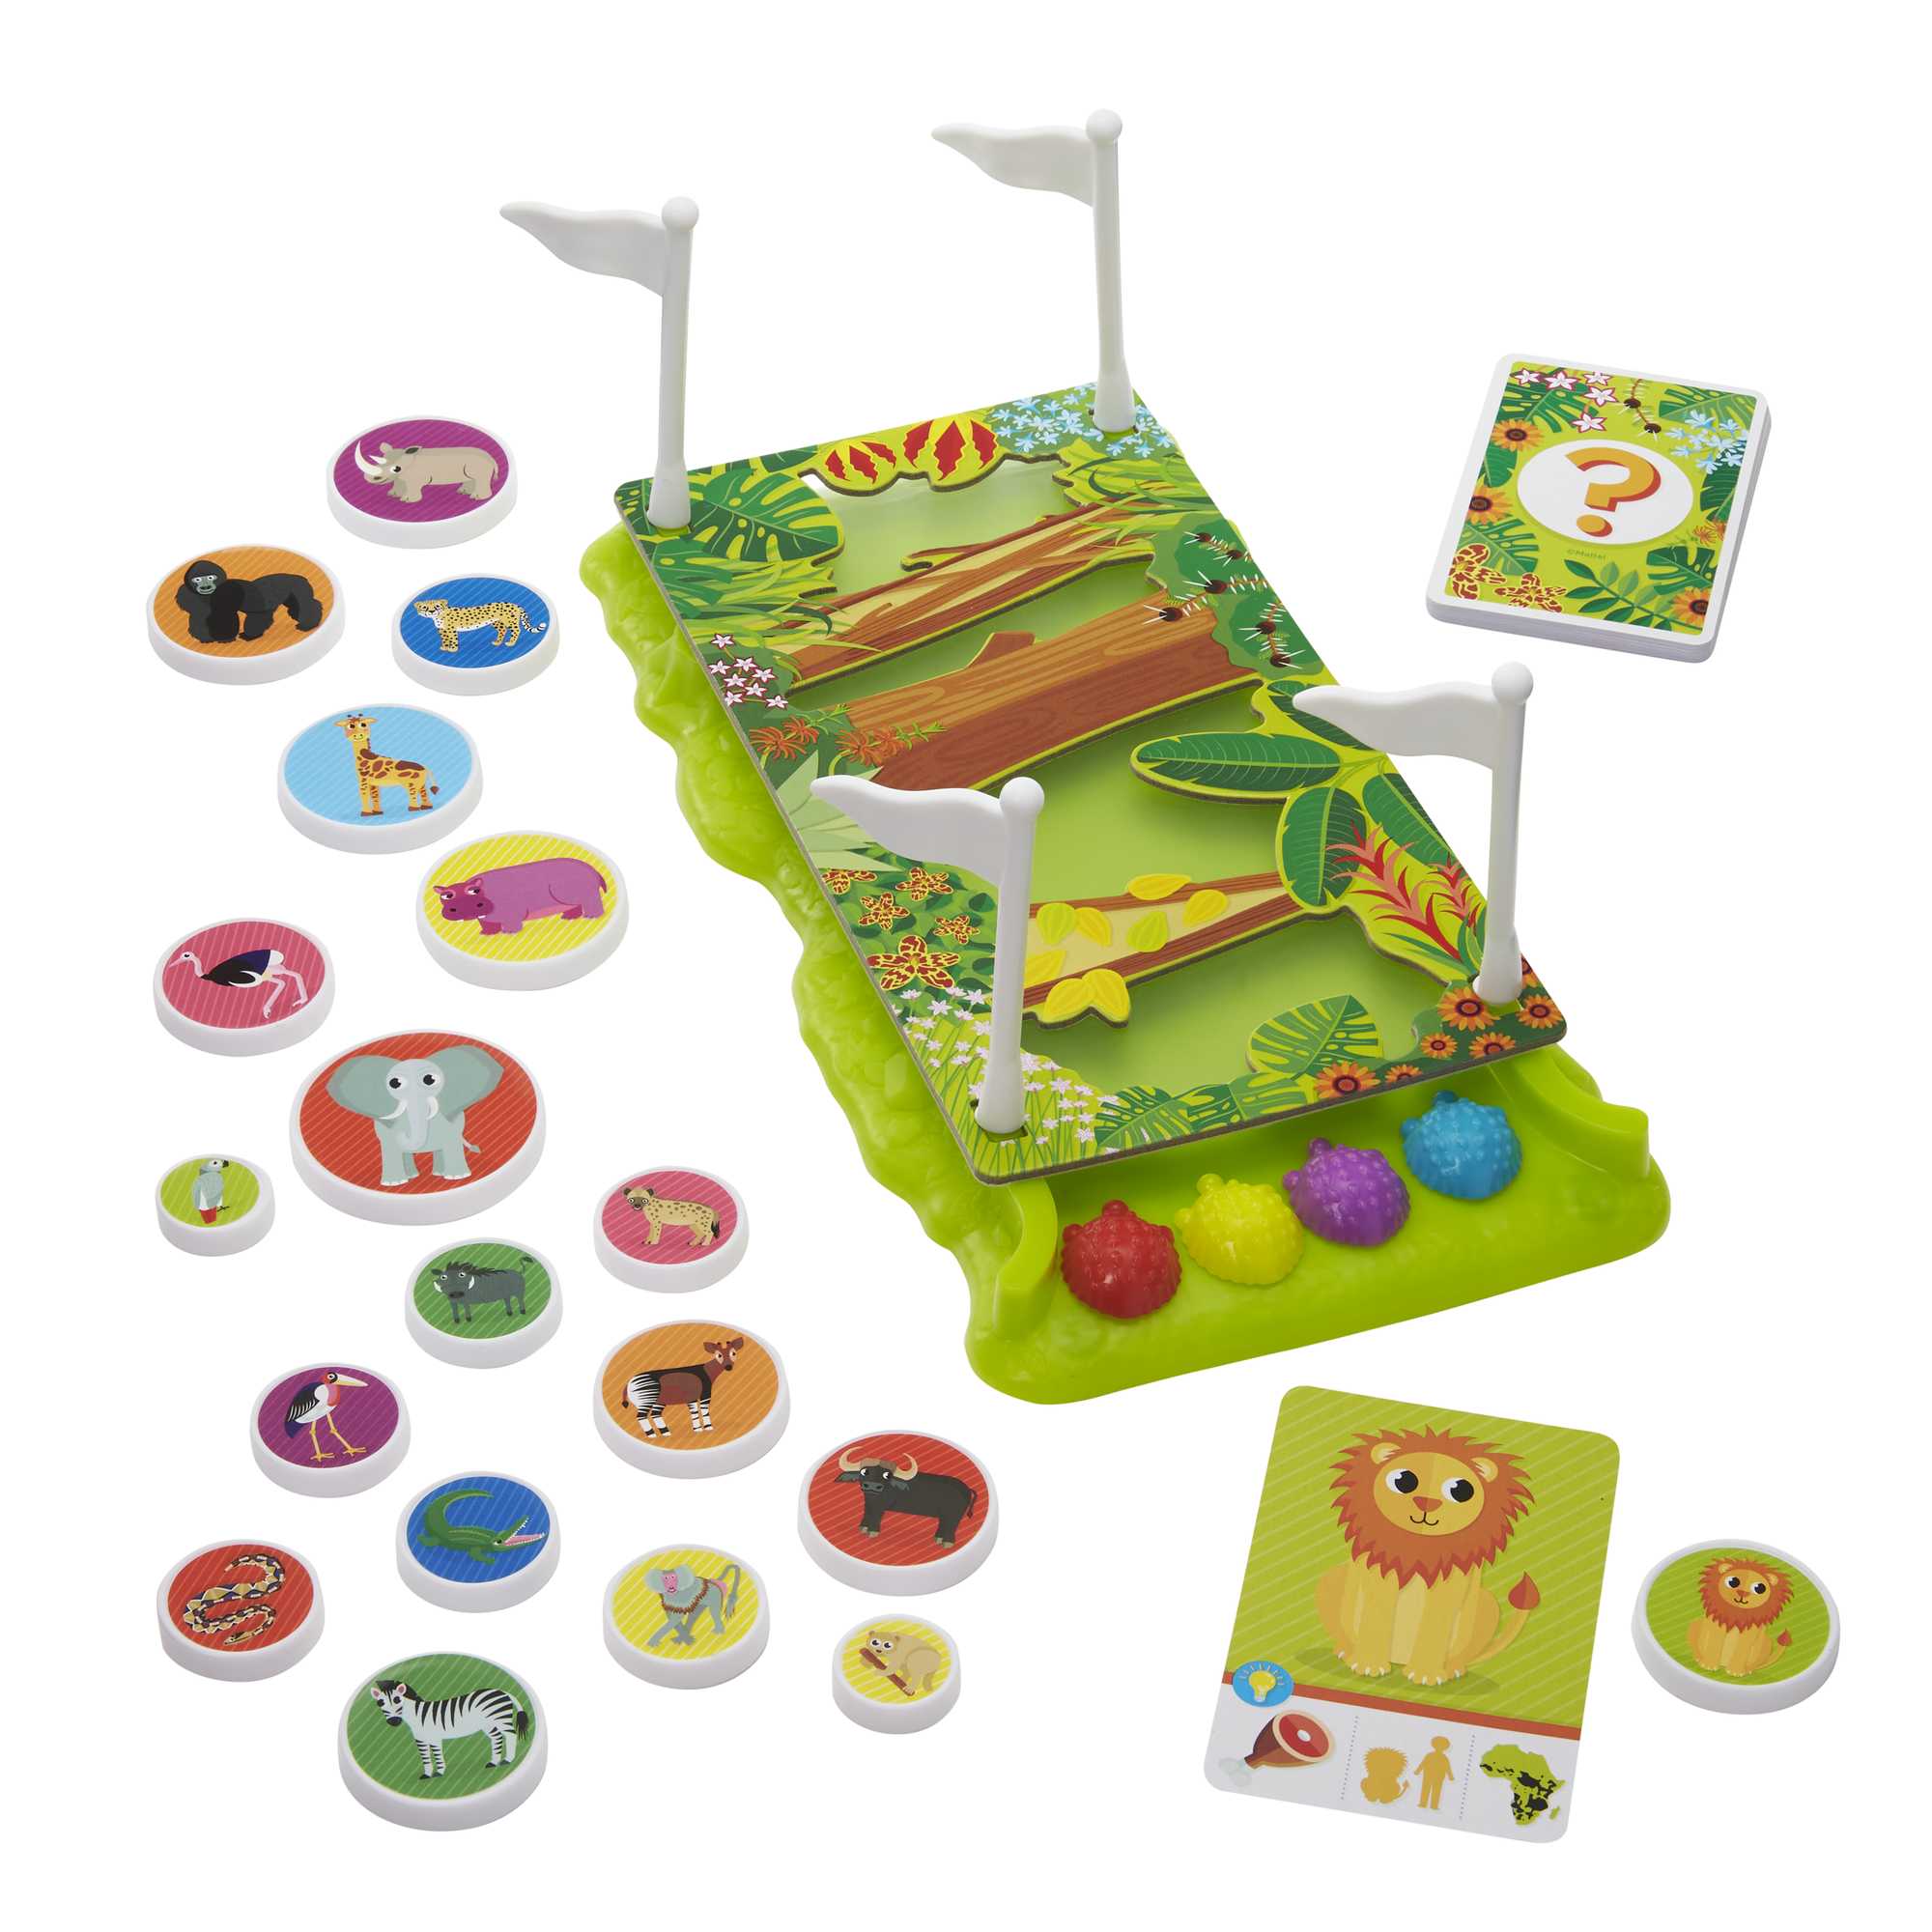 Fisher-Price Patty-Pillar Preschool Kids Game for Family Night, Match &  Learn Numbers 